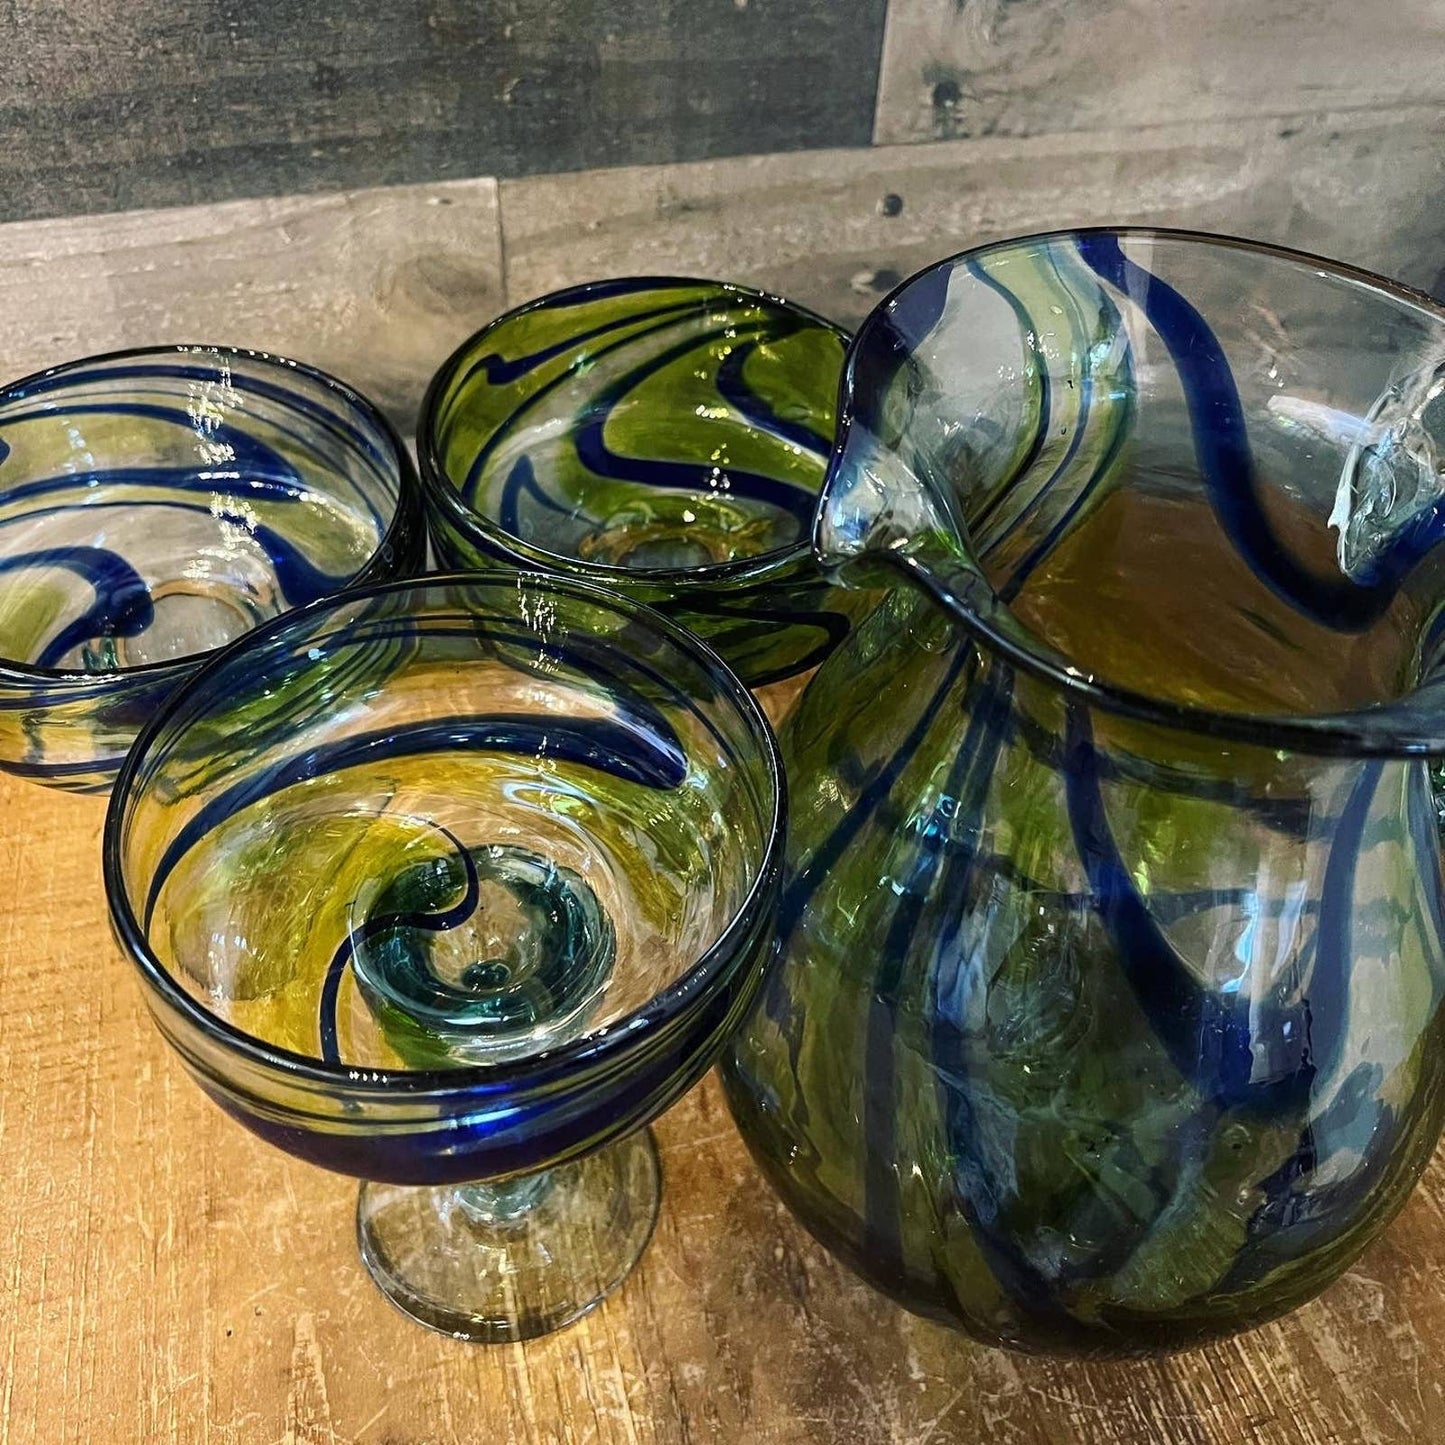 Vintage hand blown glasses and pitcher set - 3 glasses and pitcher